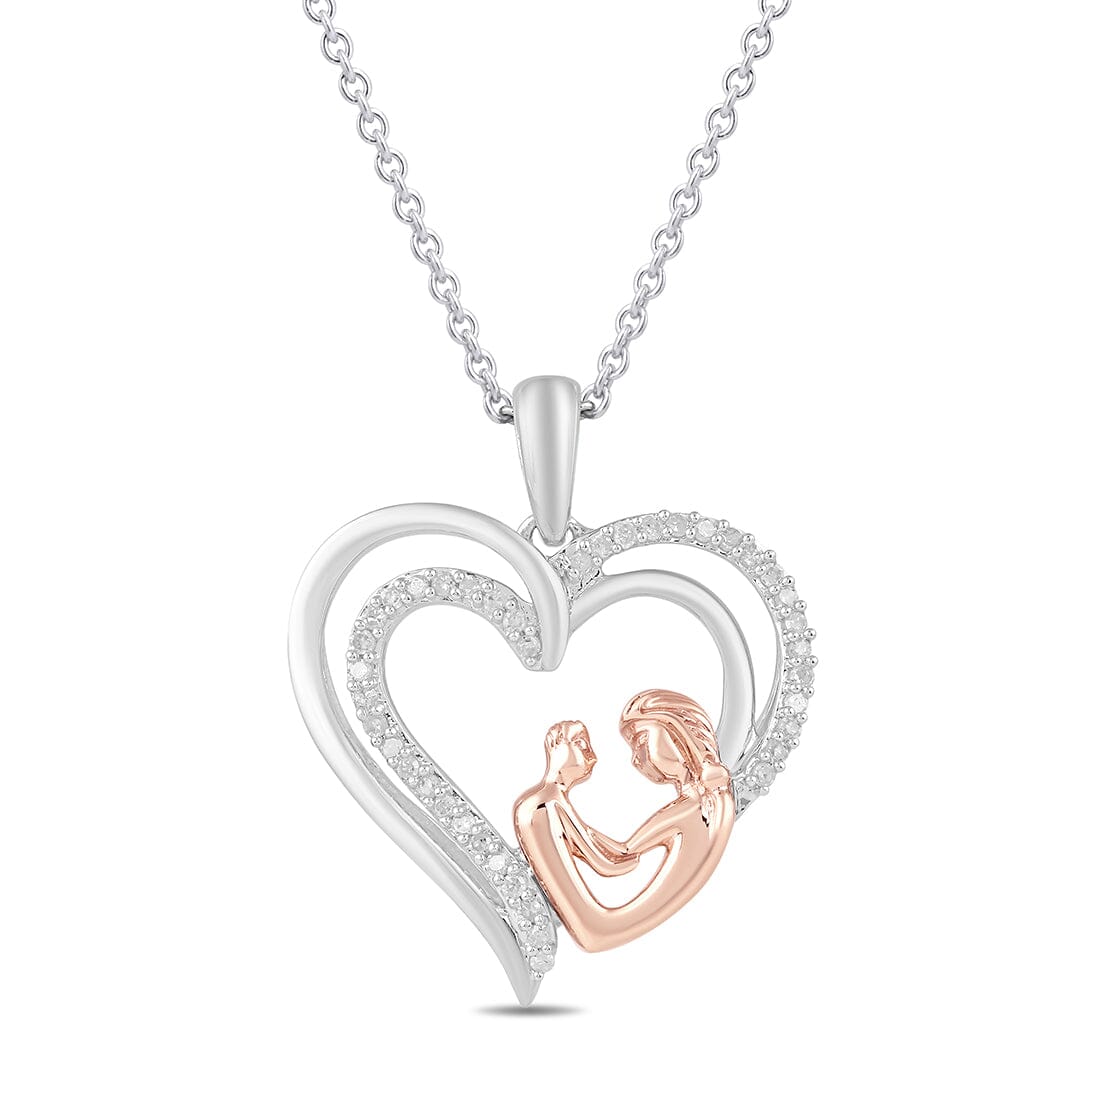 Mum and Child Heart Necklace with 0.10ct of Diamonds in Sterling Silver and 9ct Rose Gold Necklaces Bevilles 